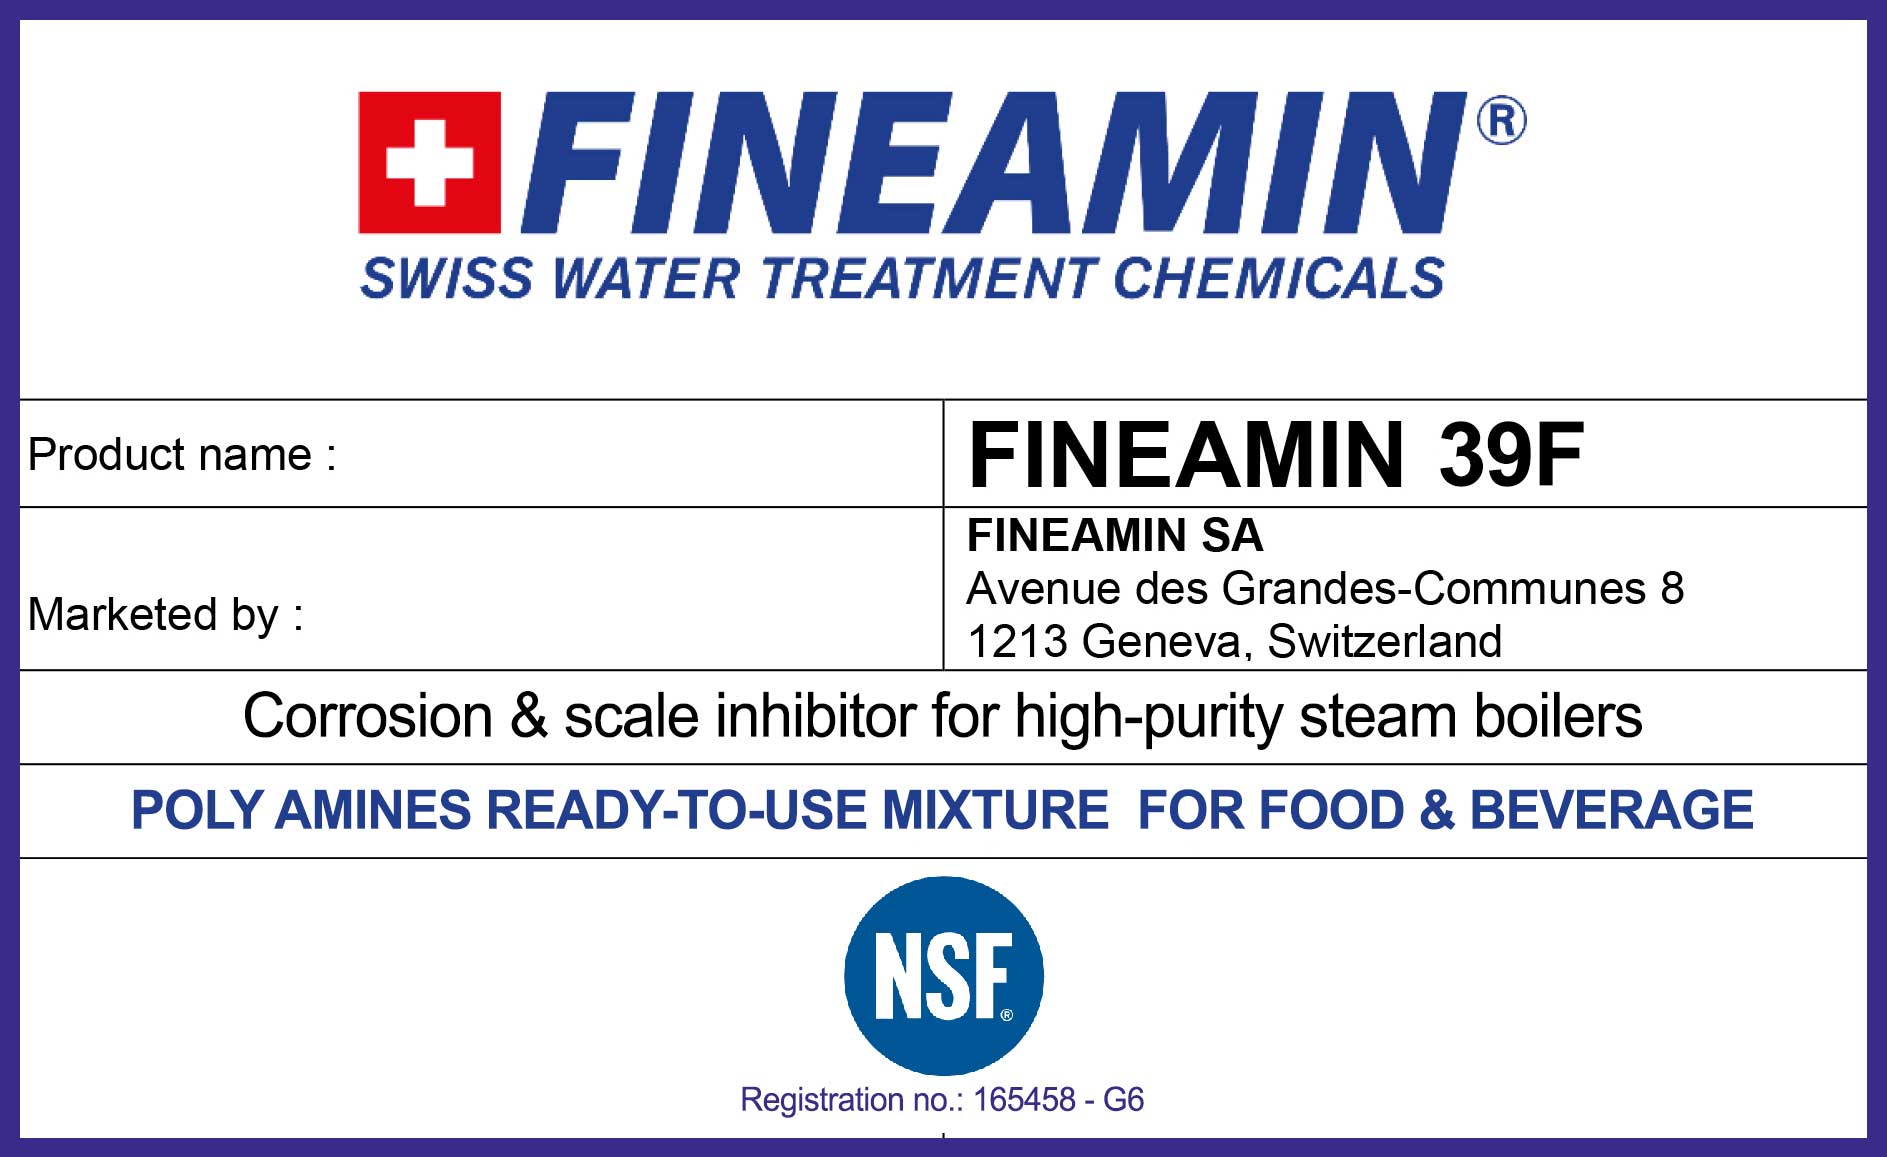 Fineamin 39F Water Treatment Chemical for Boilers in Food and beverage industry label.jpg